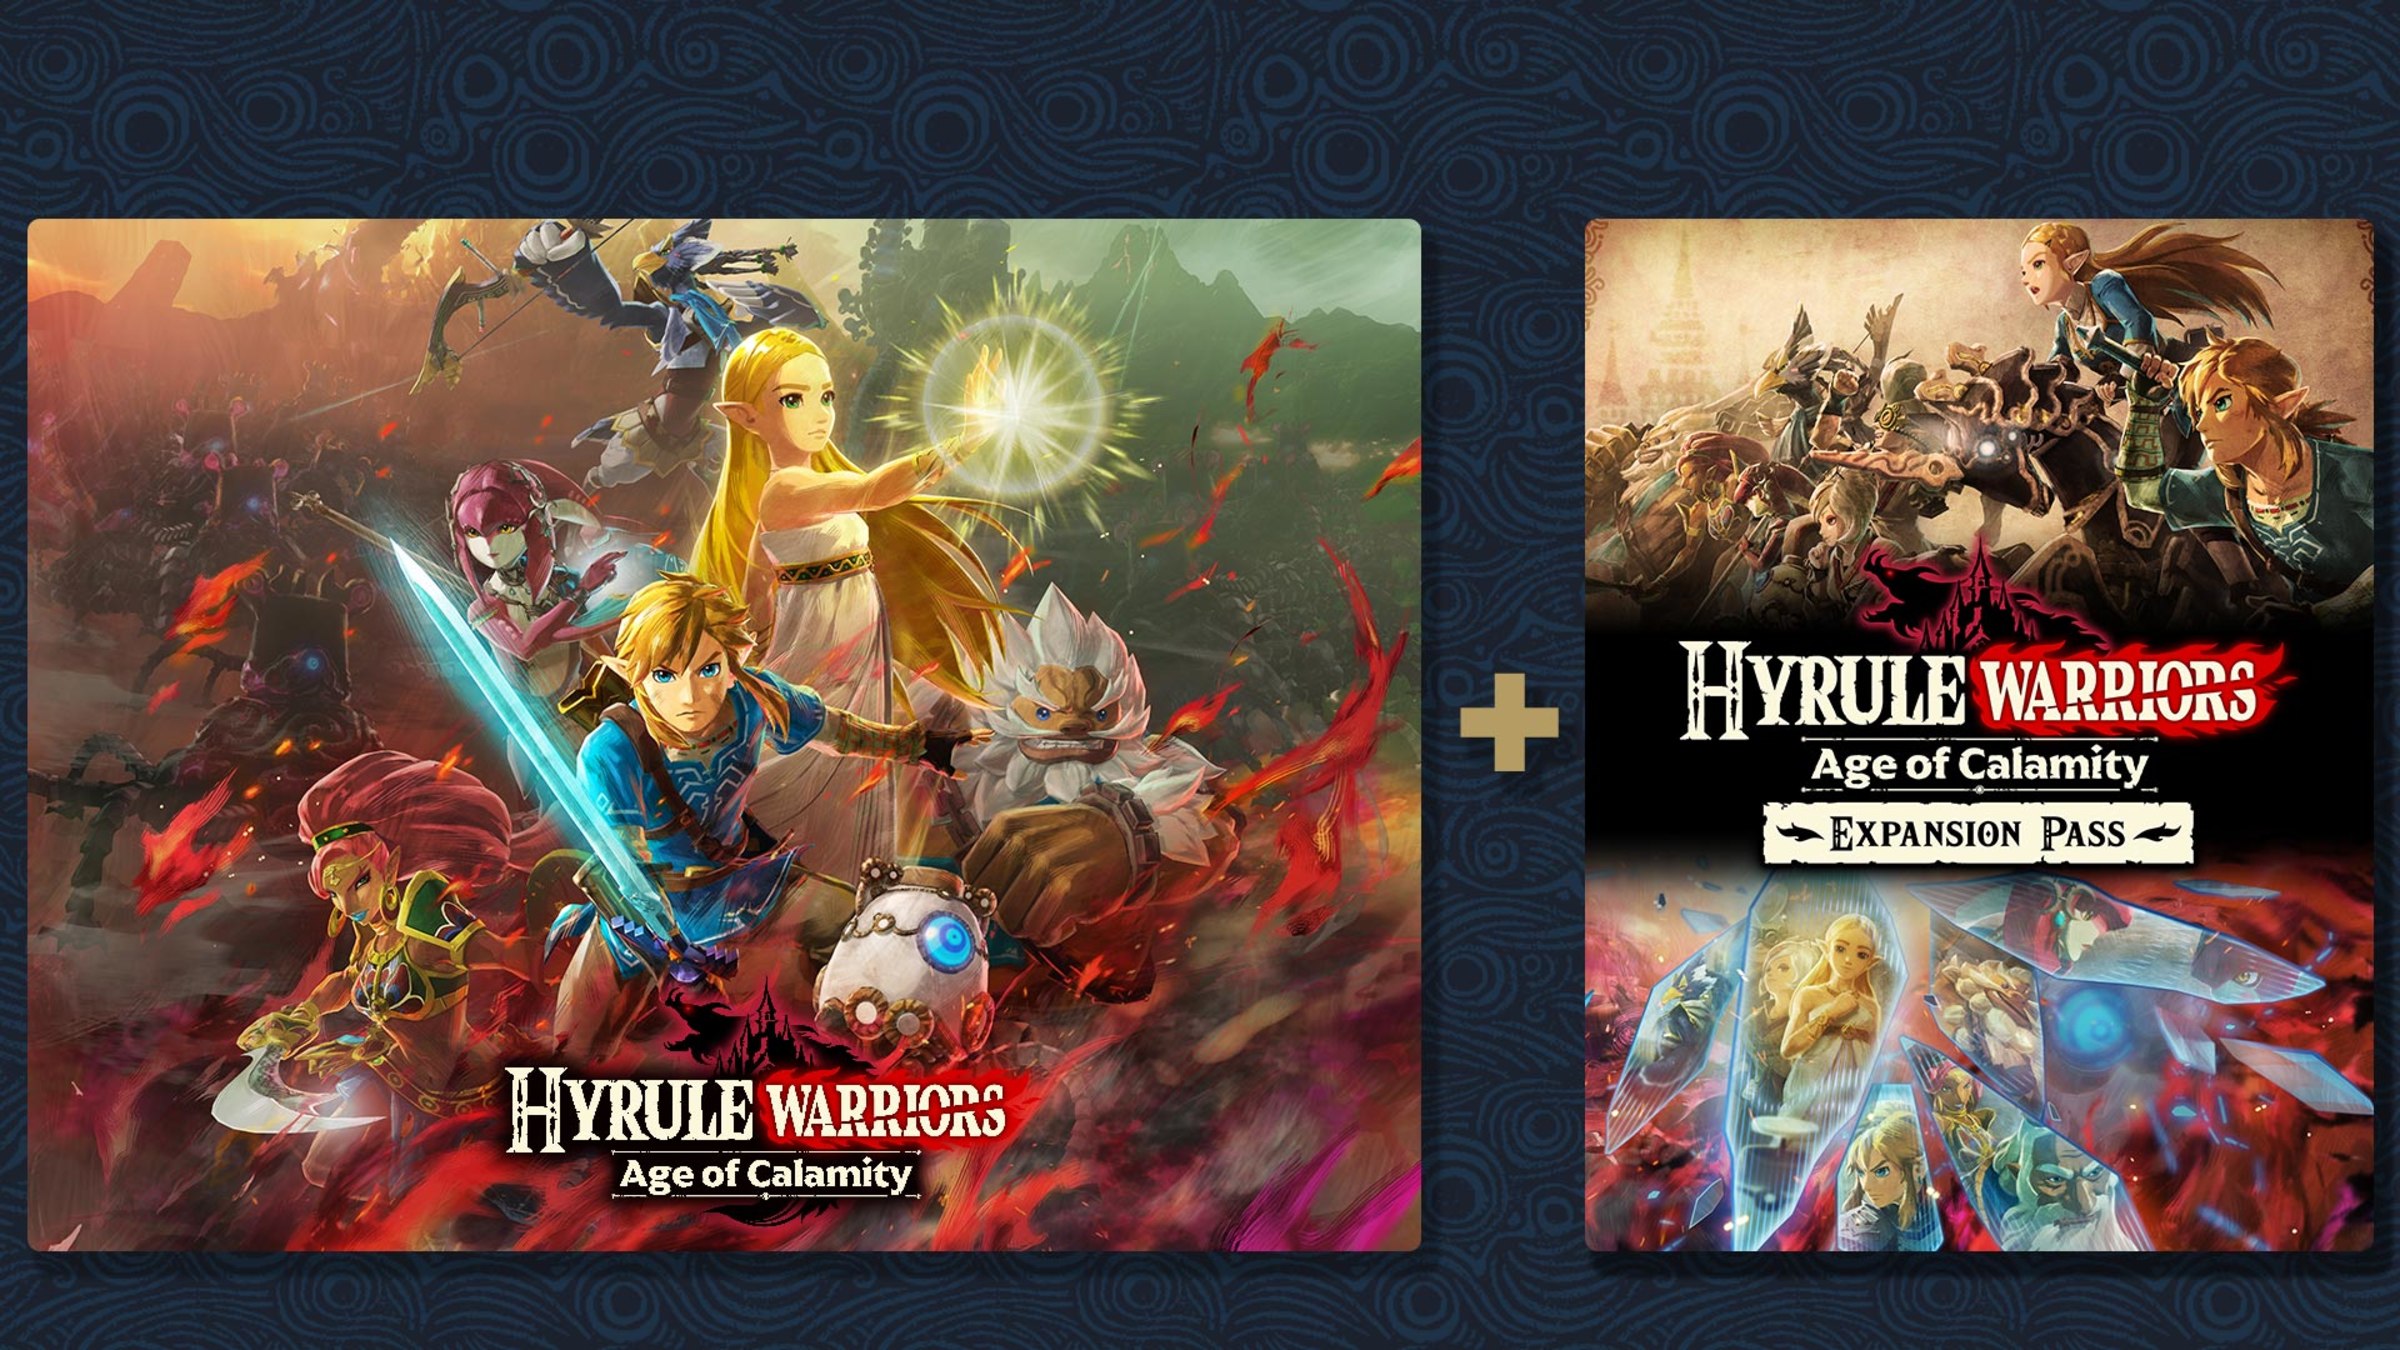 Hyrule Warriors: Age of Calamity Nintendo Warriors: + Official Calamity Site Age Expansion Pass Hyrule of Switch - Nintendo for